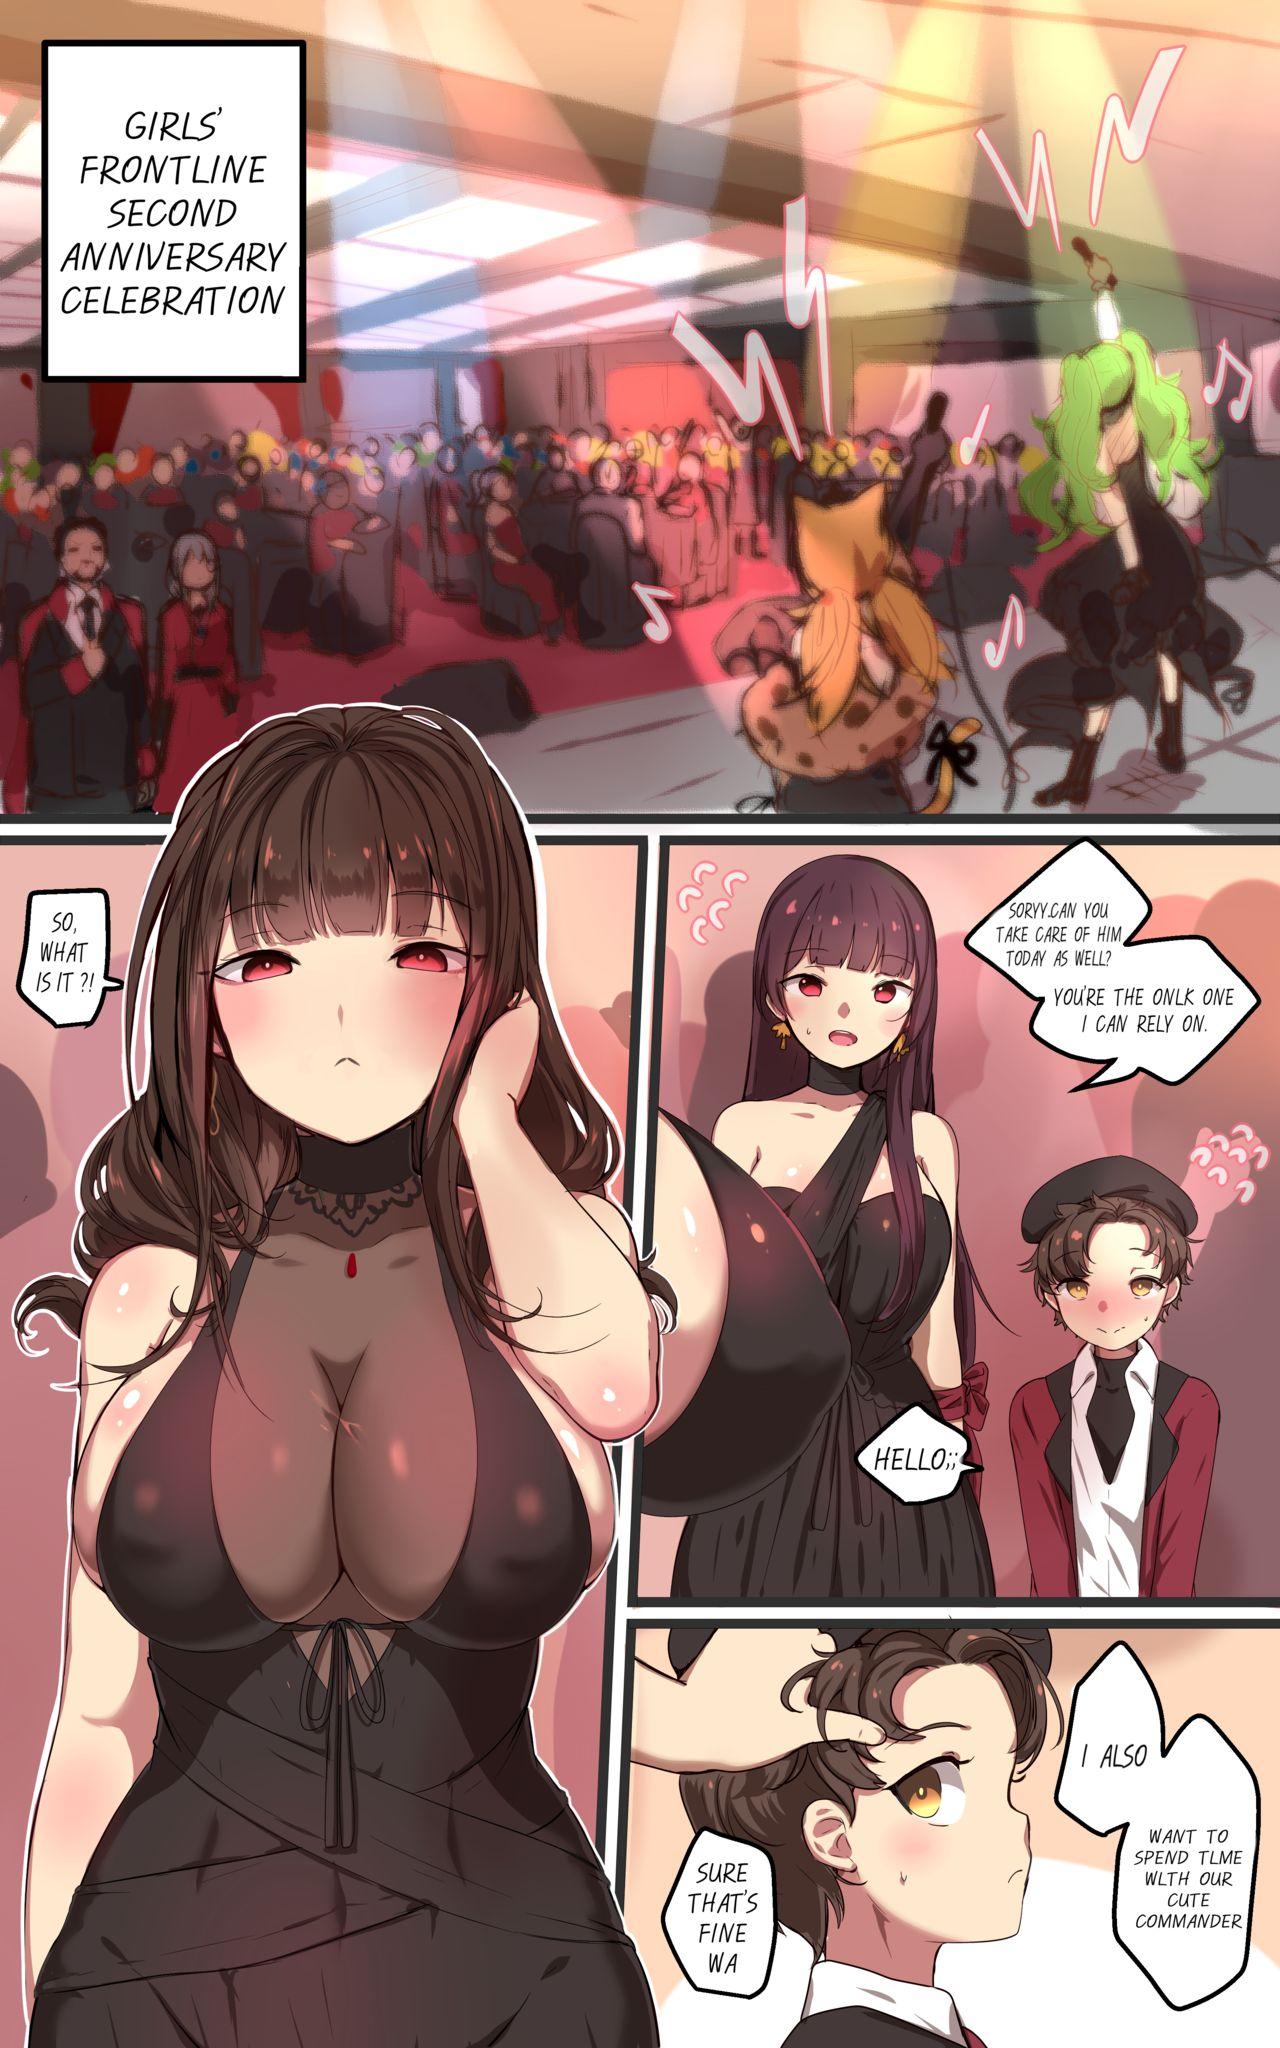 Cutie How to use dolls 07 - Girls frontline Webcams - Page 2